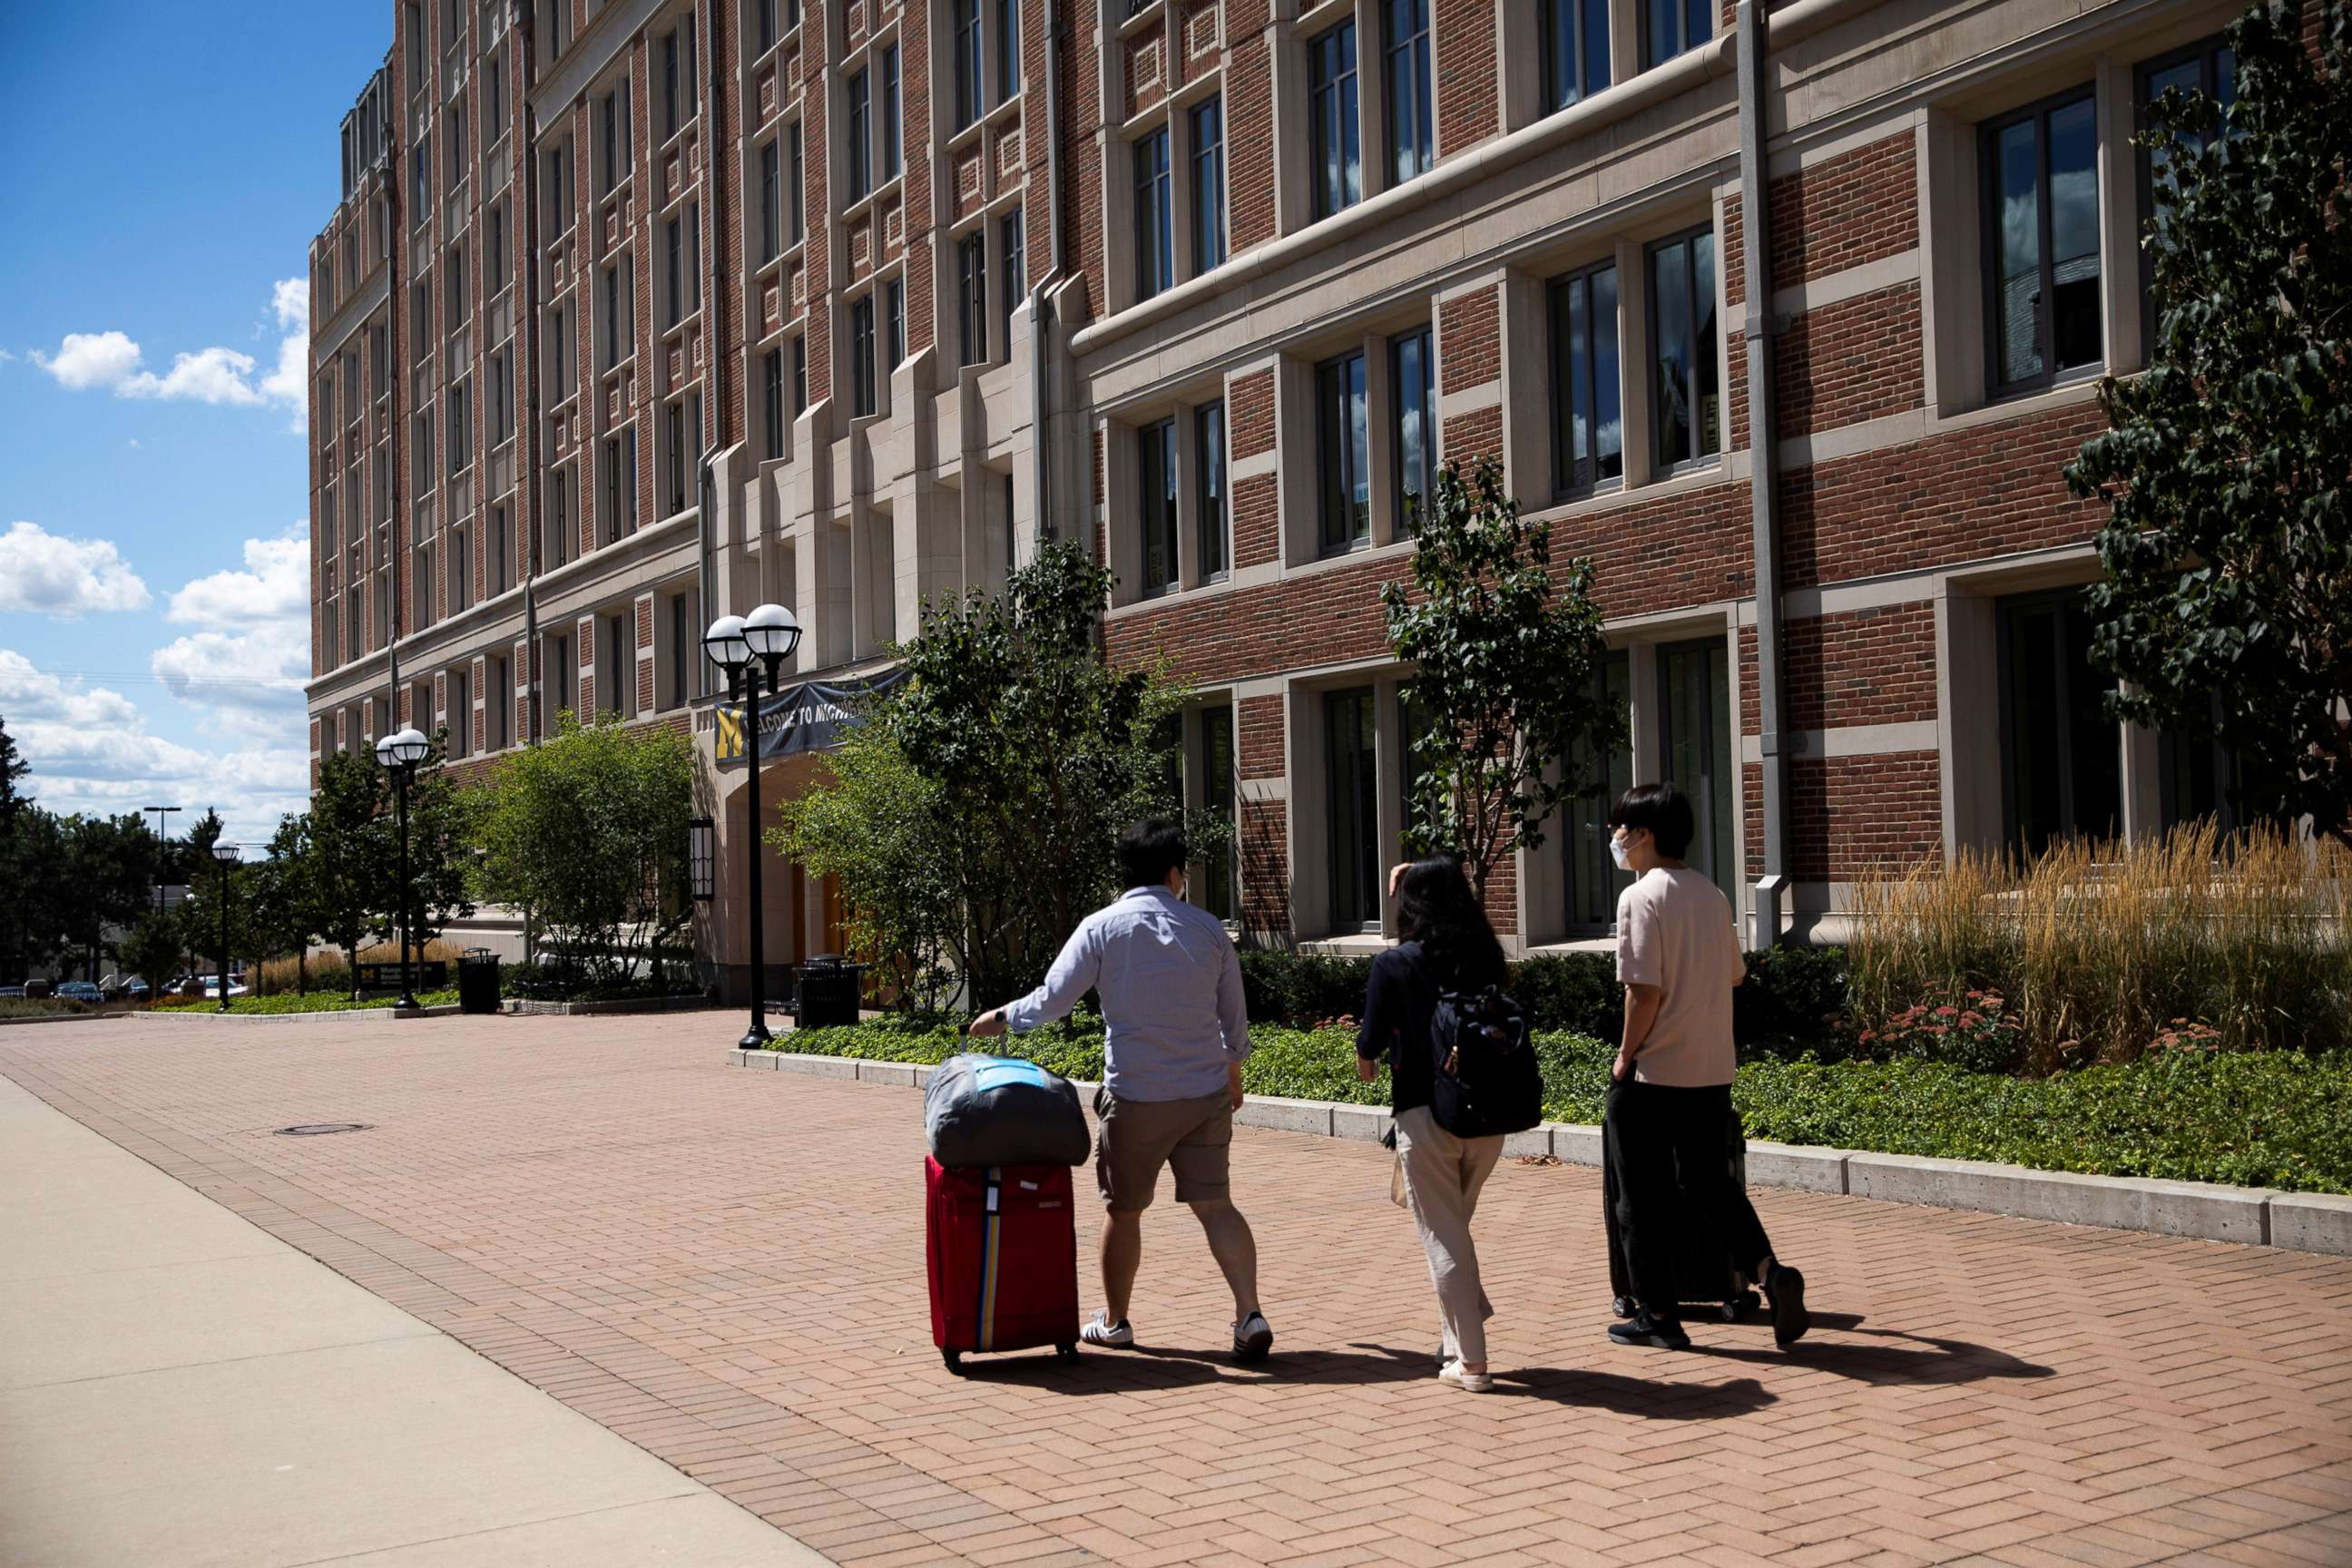 PHOTO: In this Aug. 19, 2020, file photo, students move back into the dorm for fall semester at the University of Michigan campus, amid the COVID-19 outbreak, in Ann Arbor, Mich.